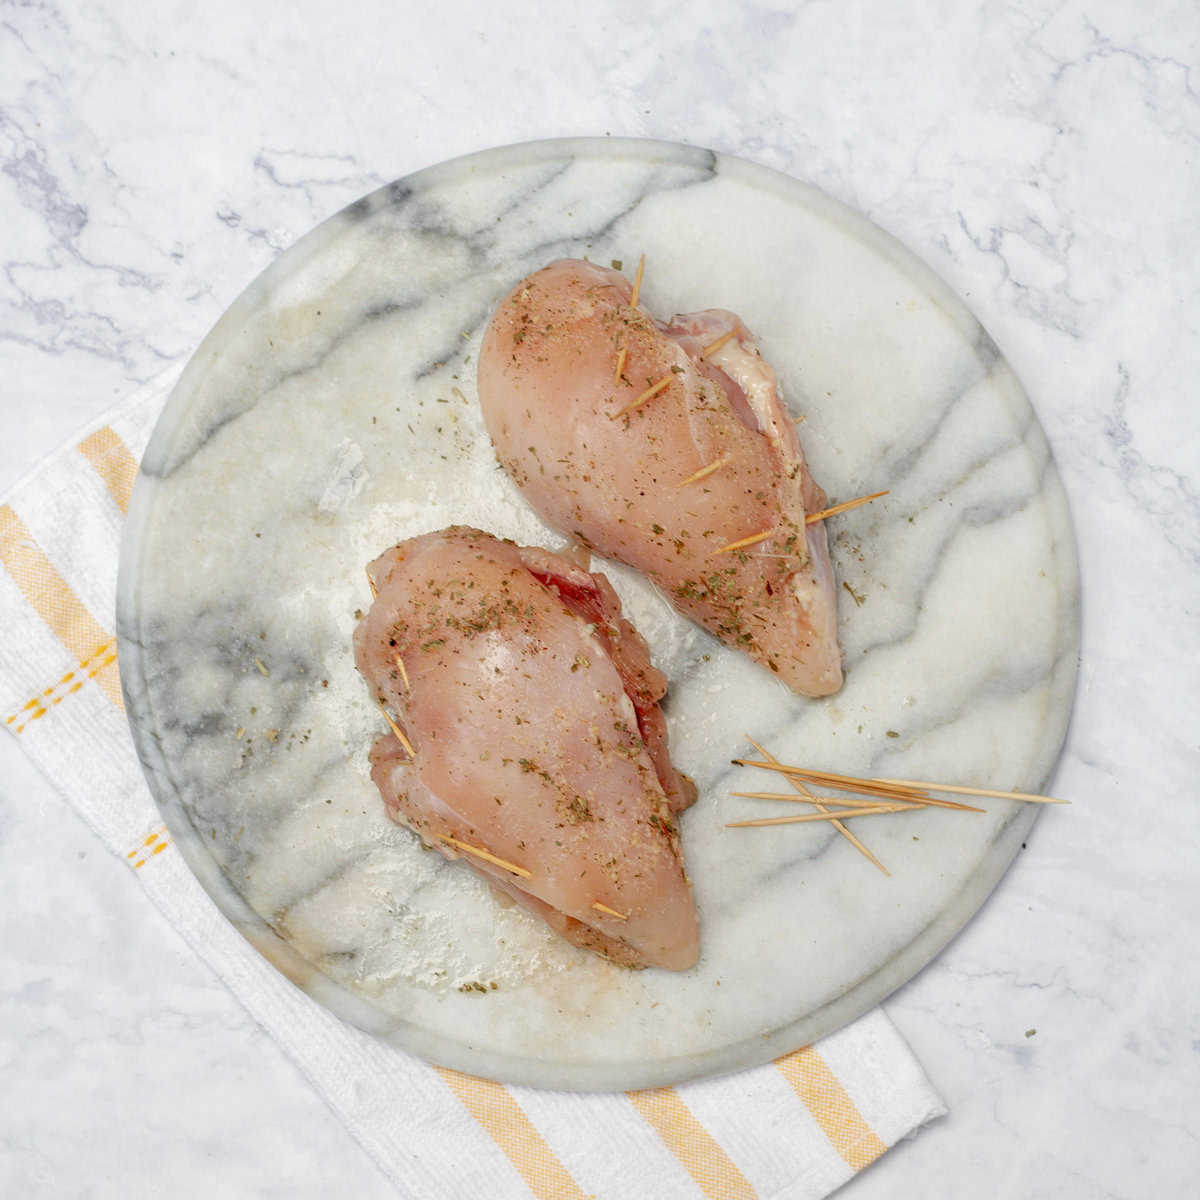 Secure the openings of the chicken breasts with toothpicks